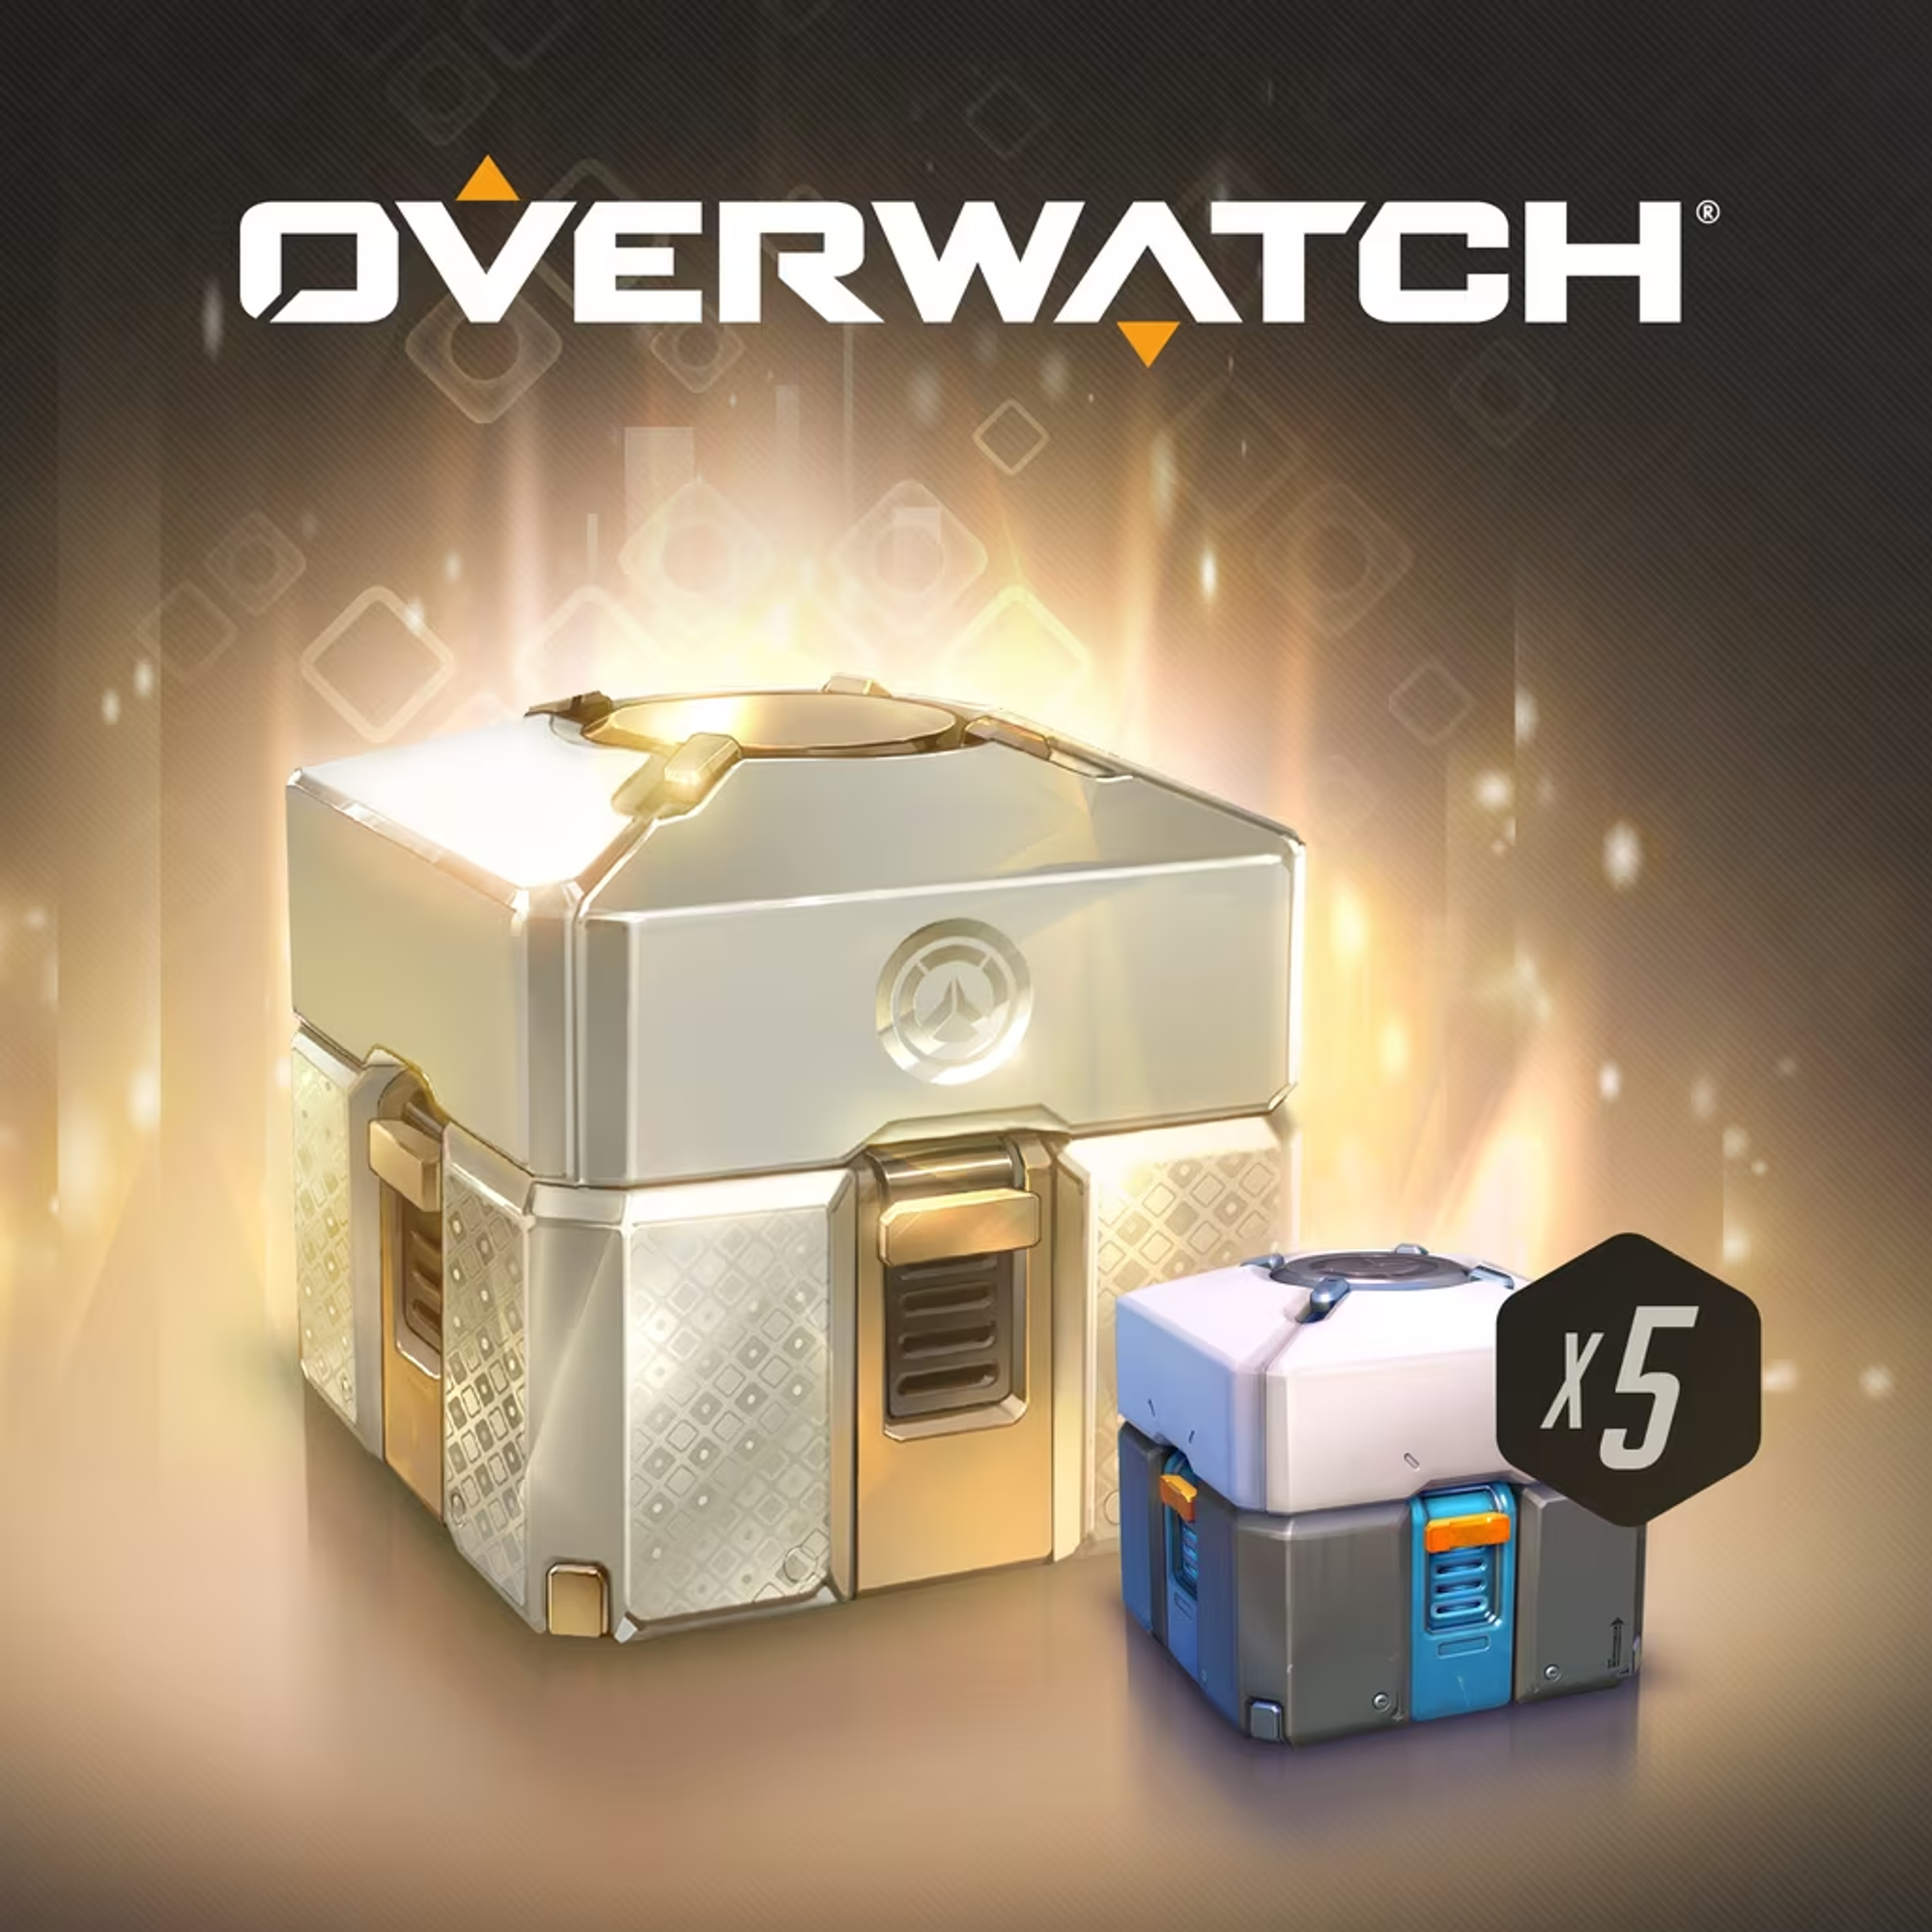 Overwatch: Loot boxes in varying rarities. Source 